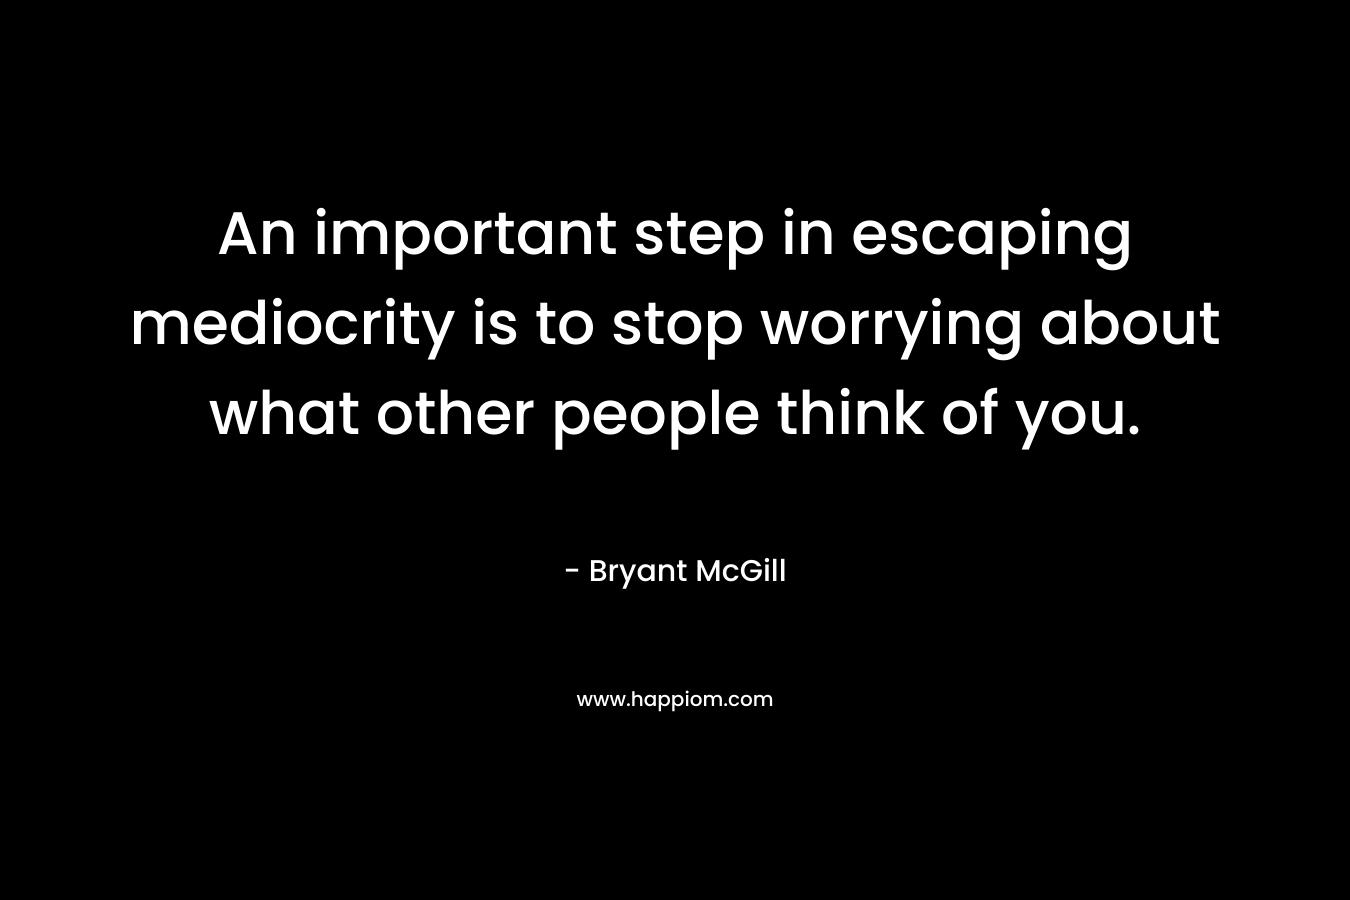 An important step in escaping mediocrity is to stop worrying about what other people think of you. – Bryant McGill